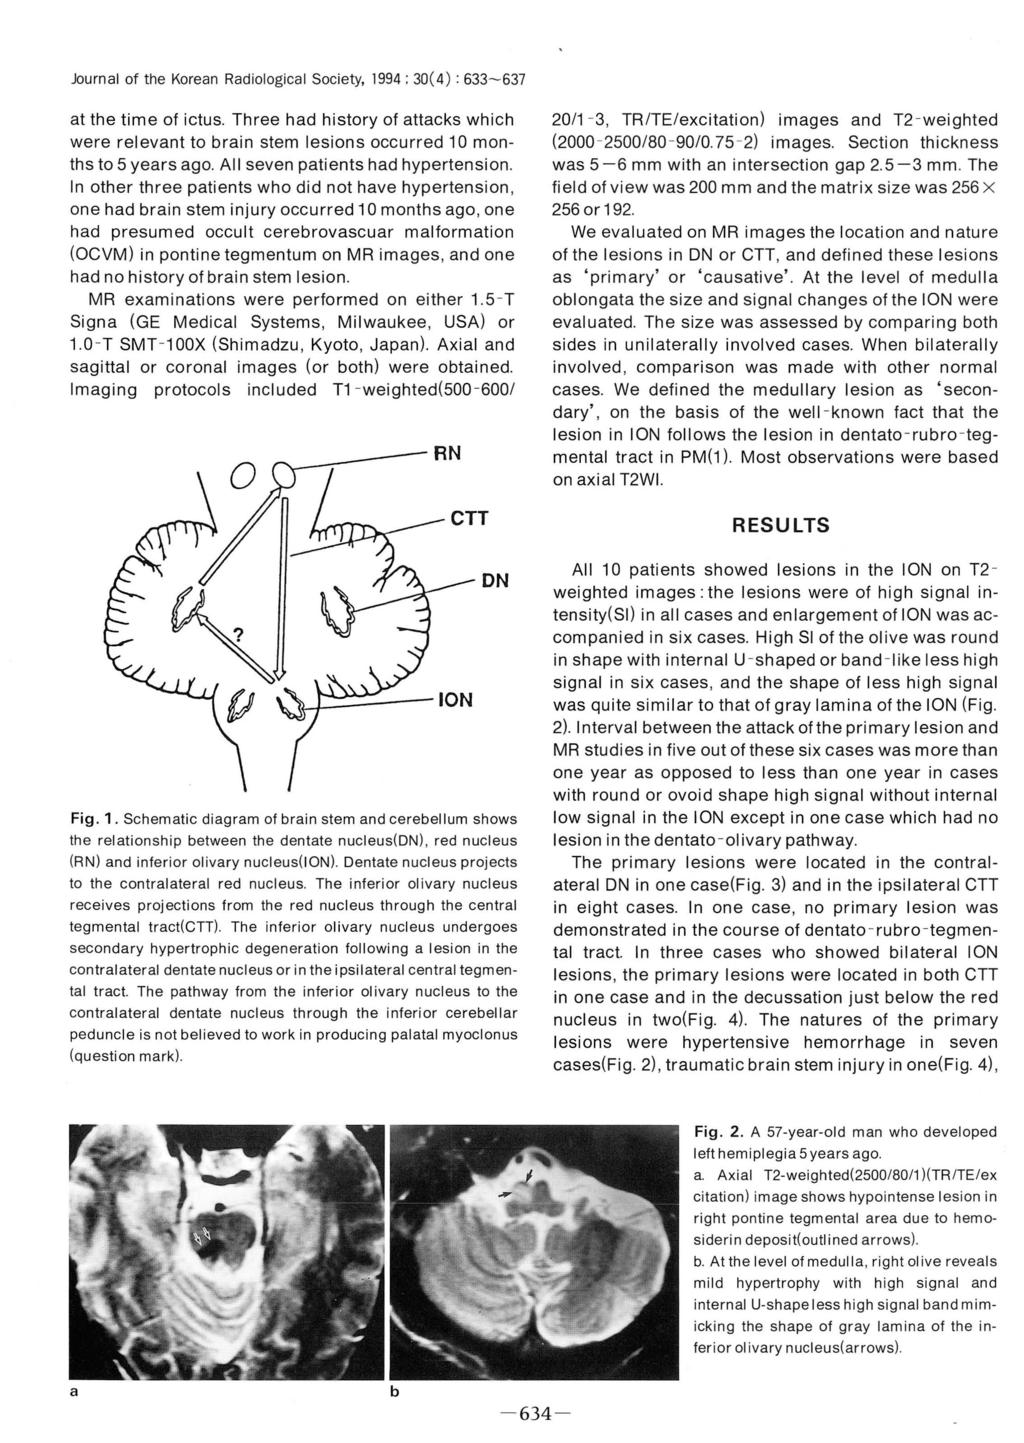 Journal of the Korean Radiological Society, 1994 : 30(4) : 633-637 at the time of ictus. Three had history of attacks which were relevant to brain stem lesions occurred 10 months to 5 years ago.